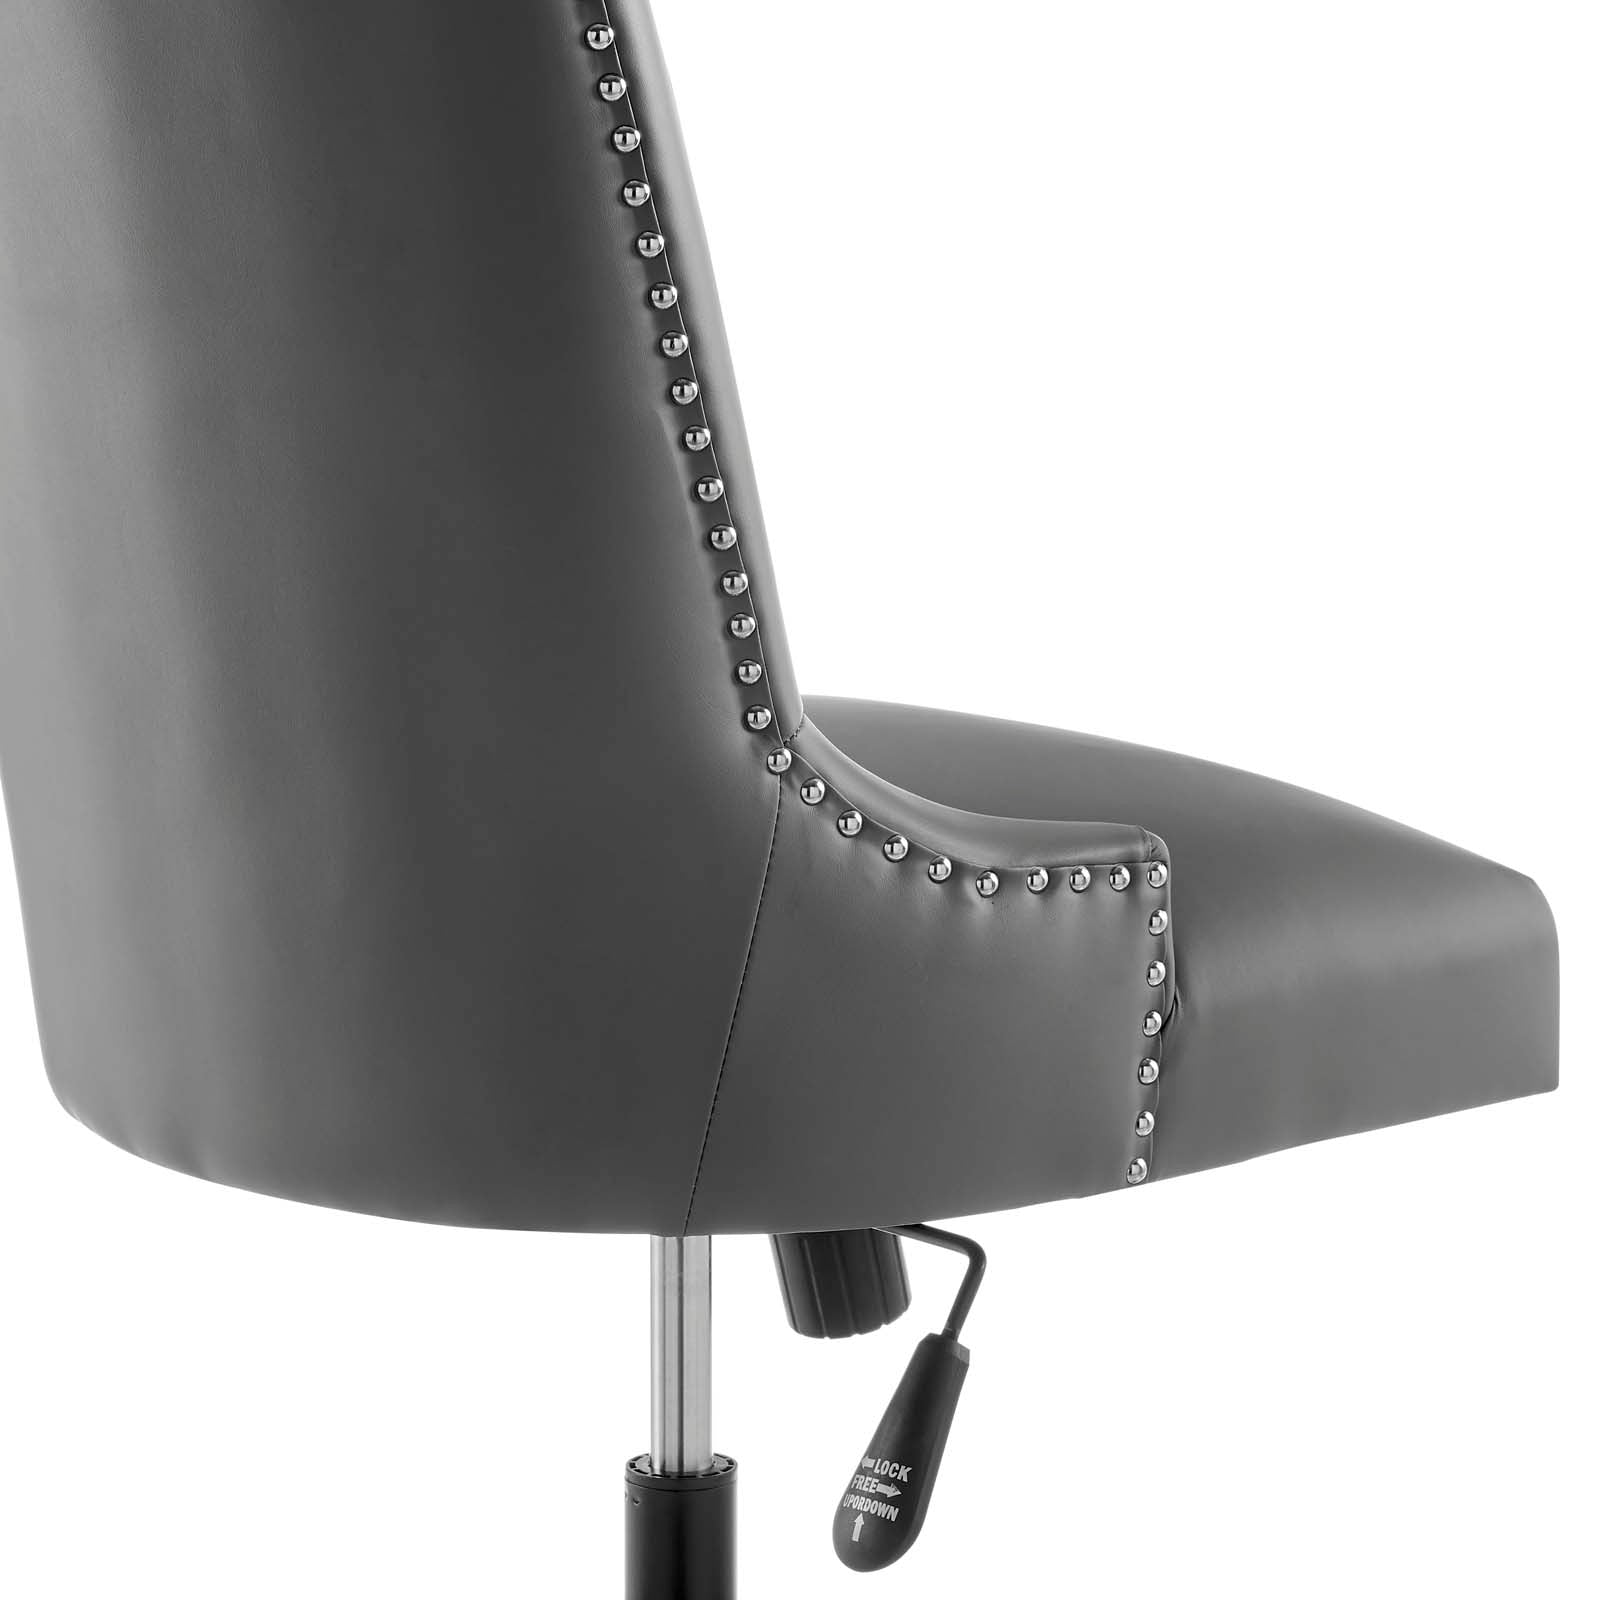 Modway Task Chairs - Empower Channel Tufted Vegan Leather Office Chair Black Gray